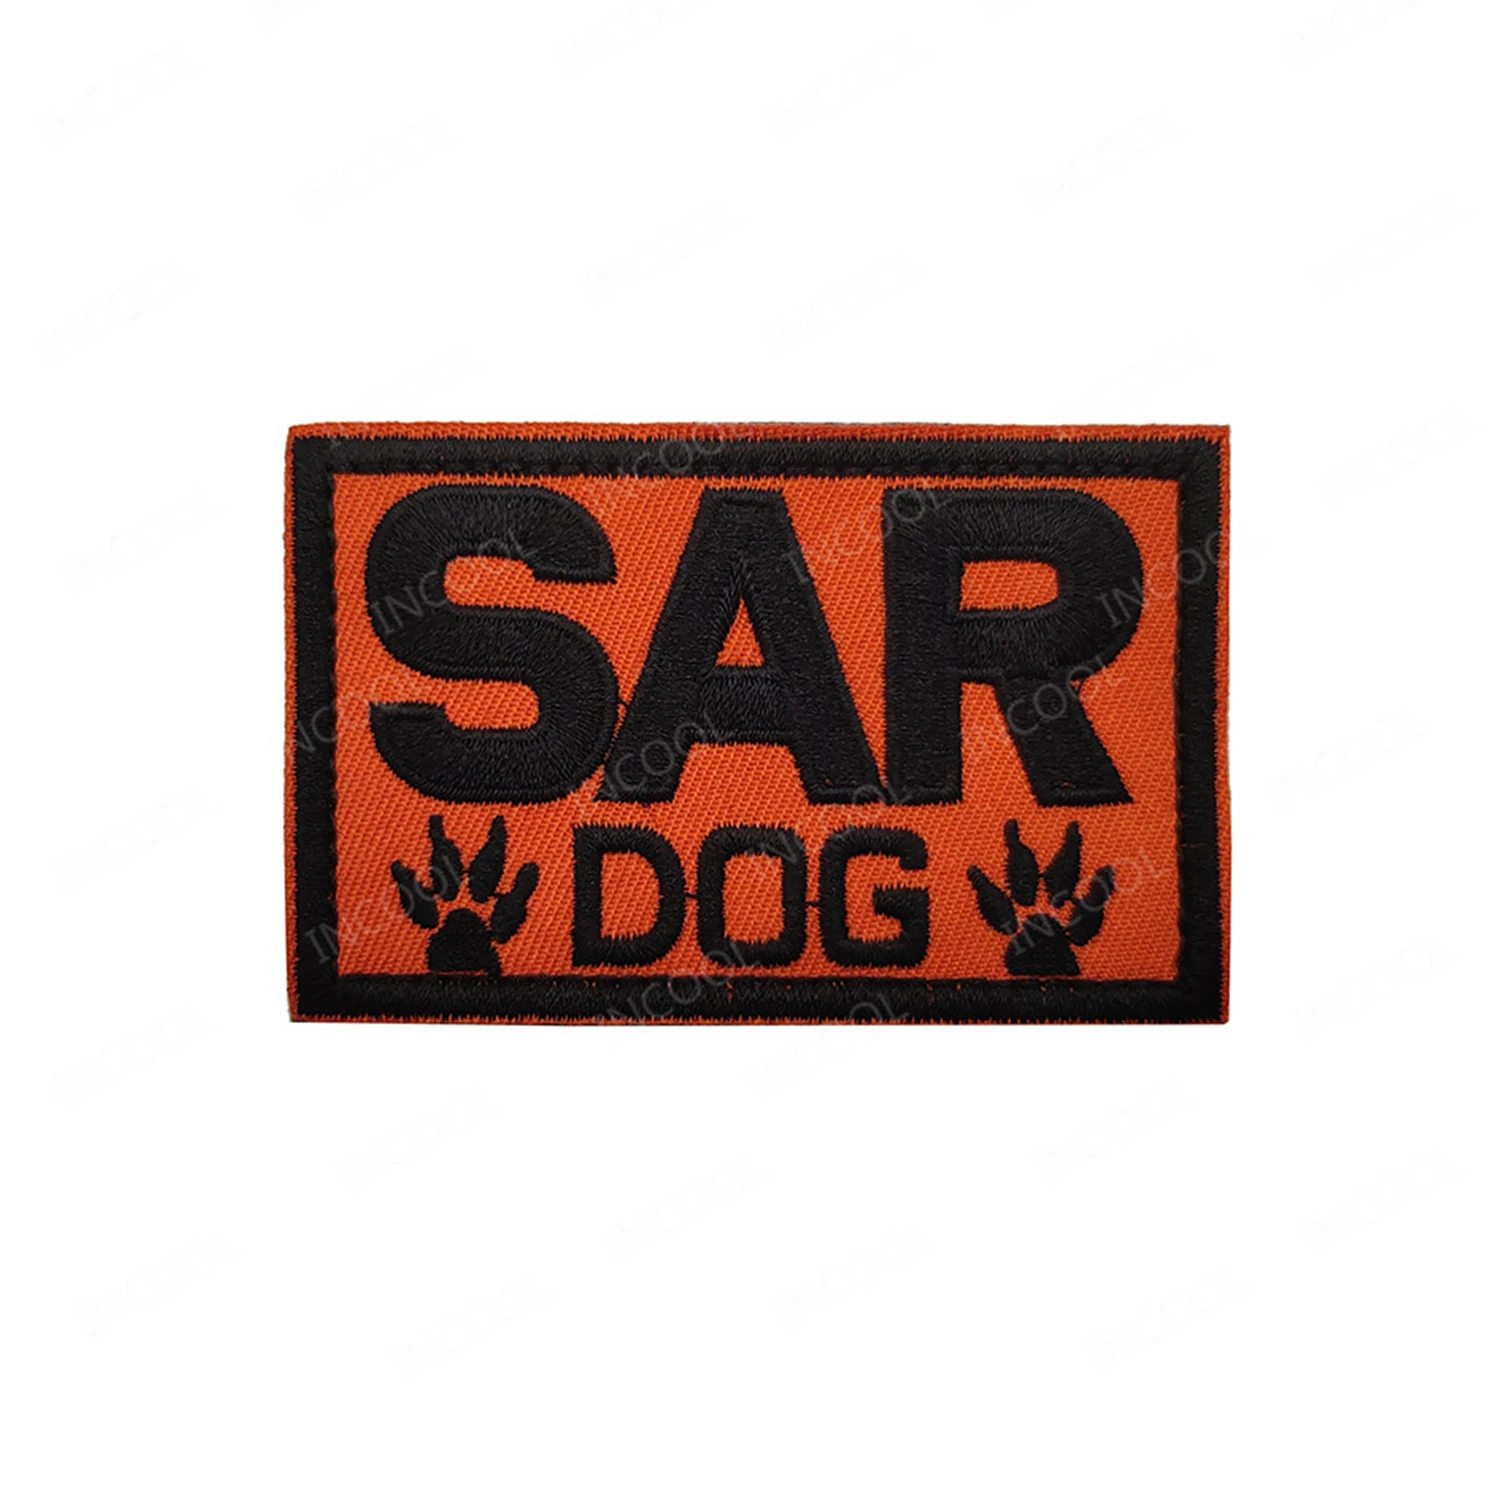 SAR Dog Embroidered Patches Search and Rescue K9 Working Service Dog Tactical Military Patch Armband Badges For Harness Vests